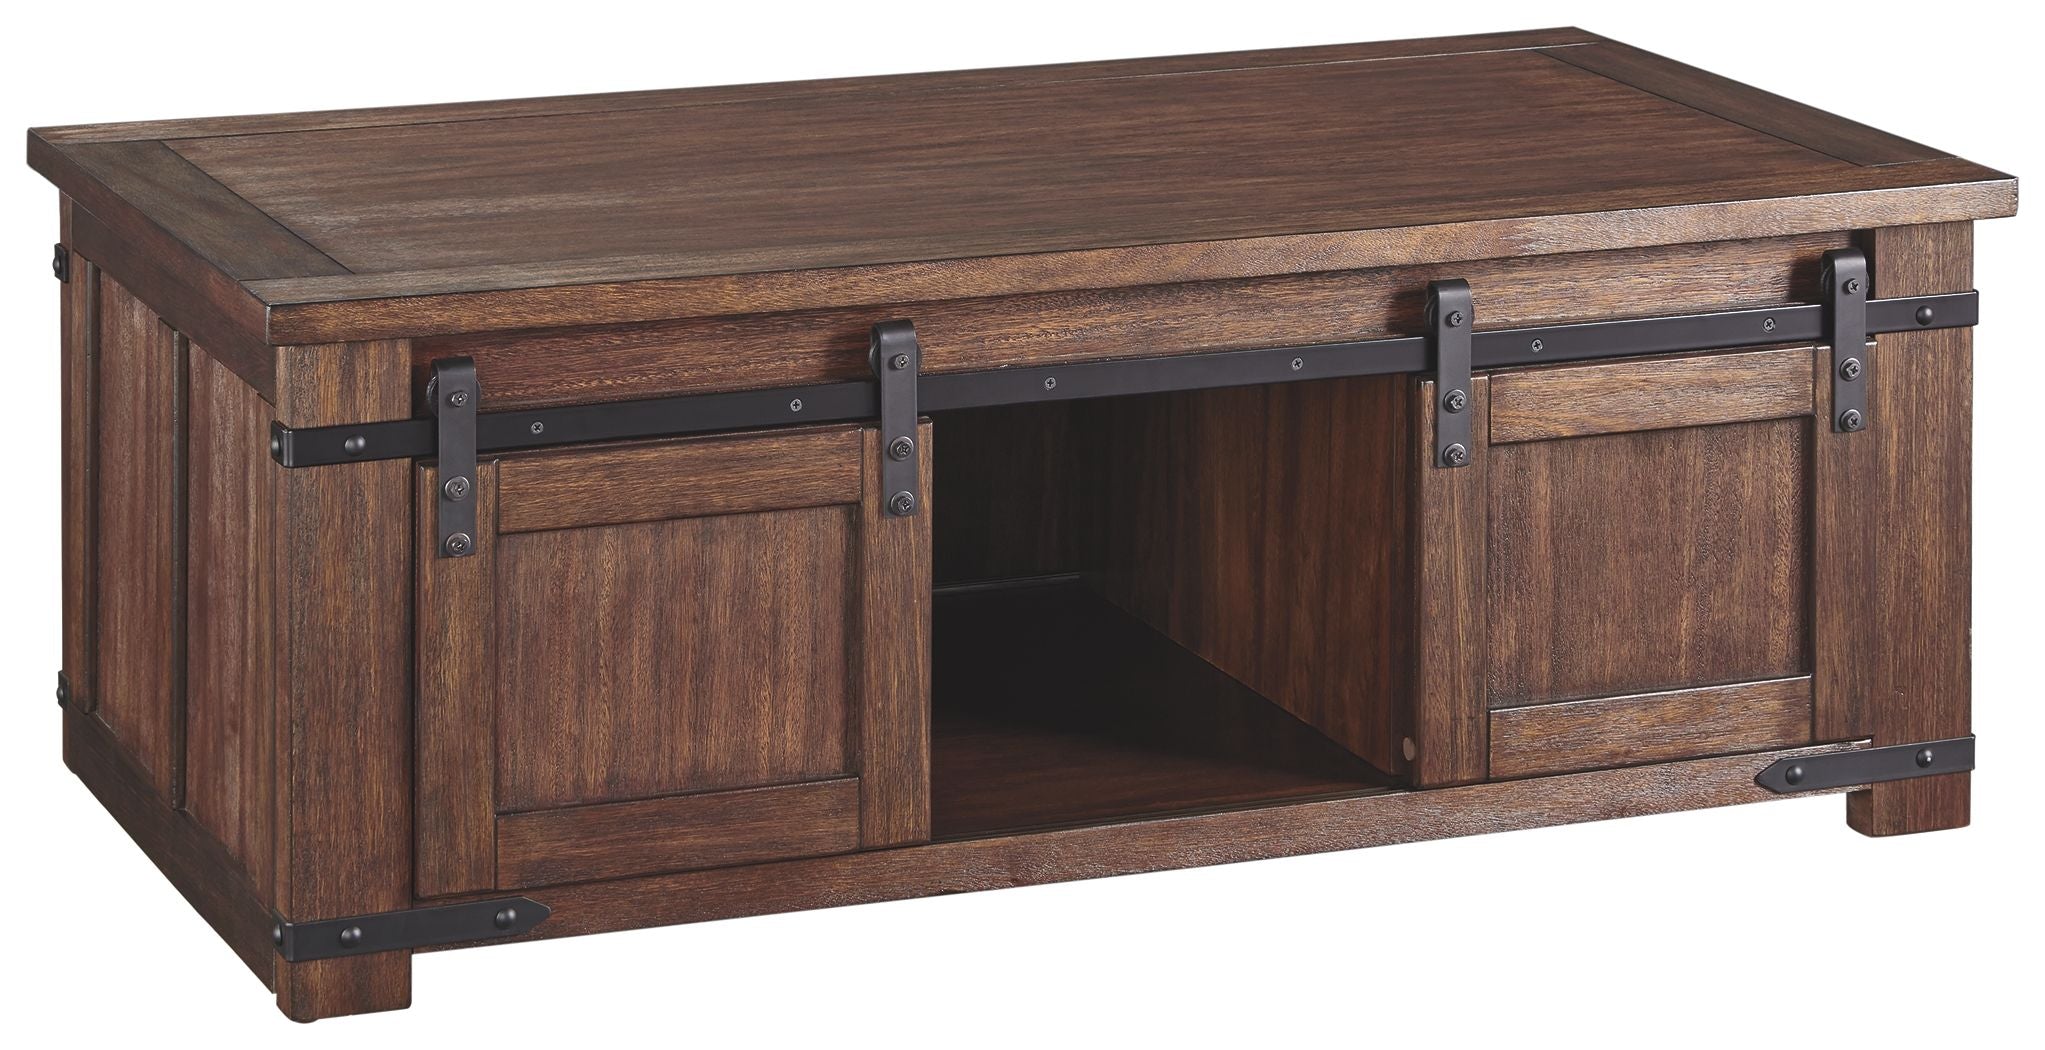 Budmore - Brown - Rectangular Cocktail Table